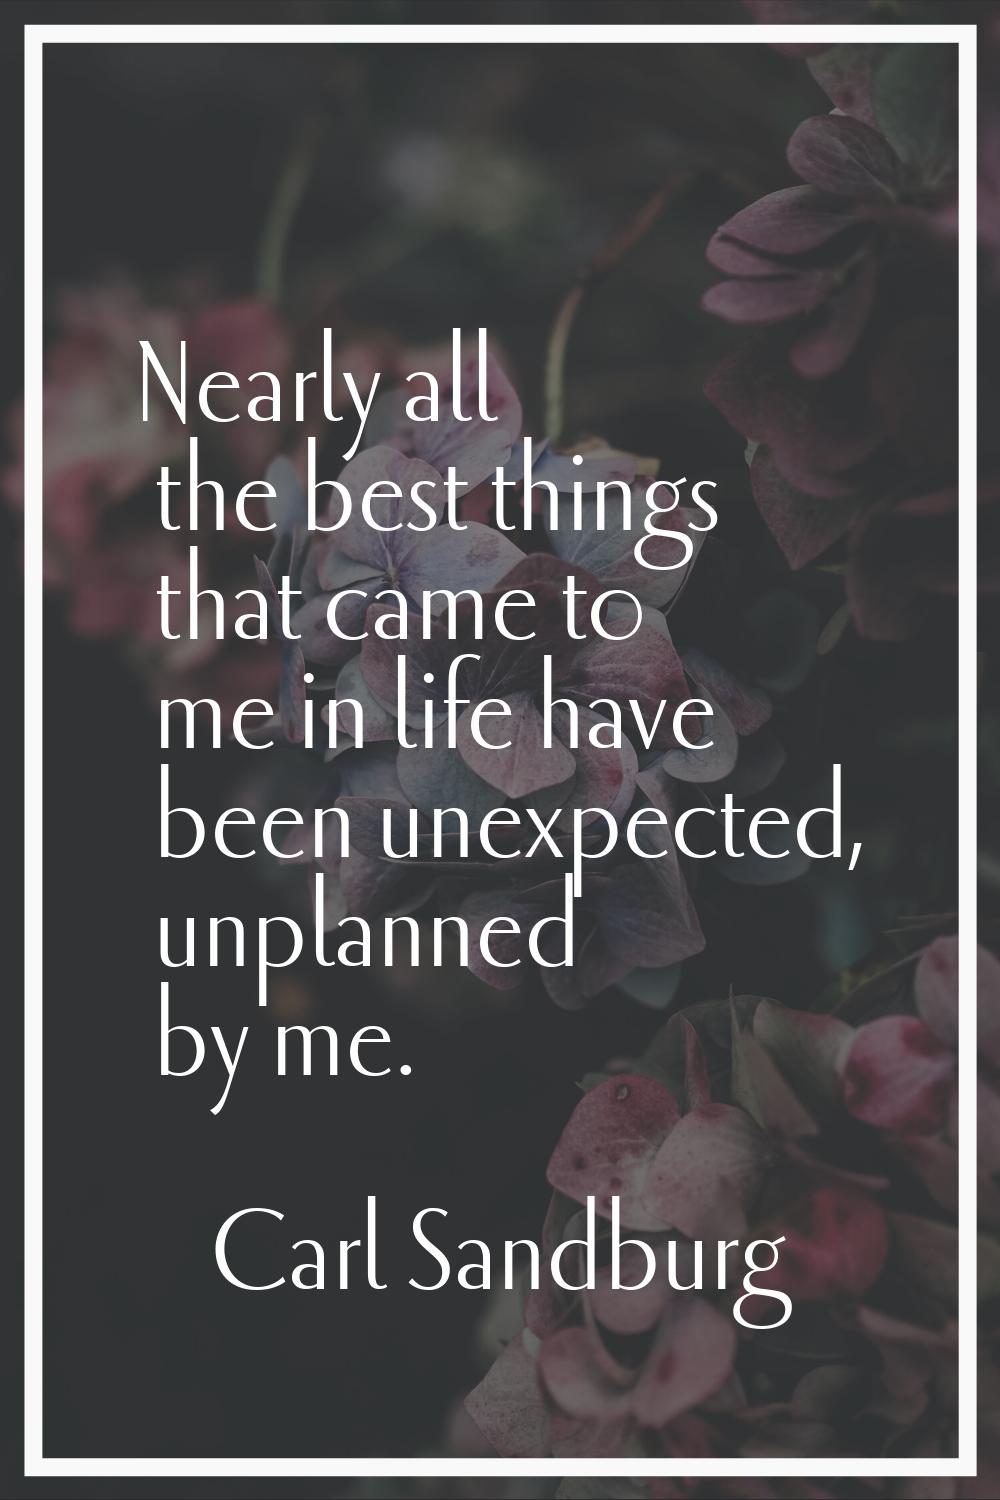 Nearly all the best things that came to me in life have been unexpected, unplanned by me.